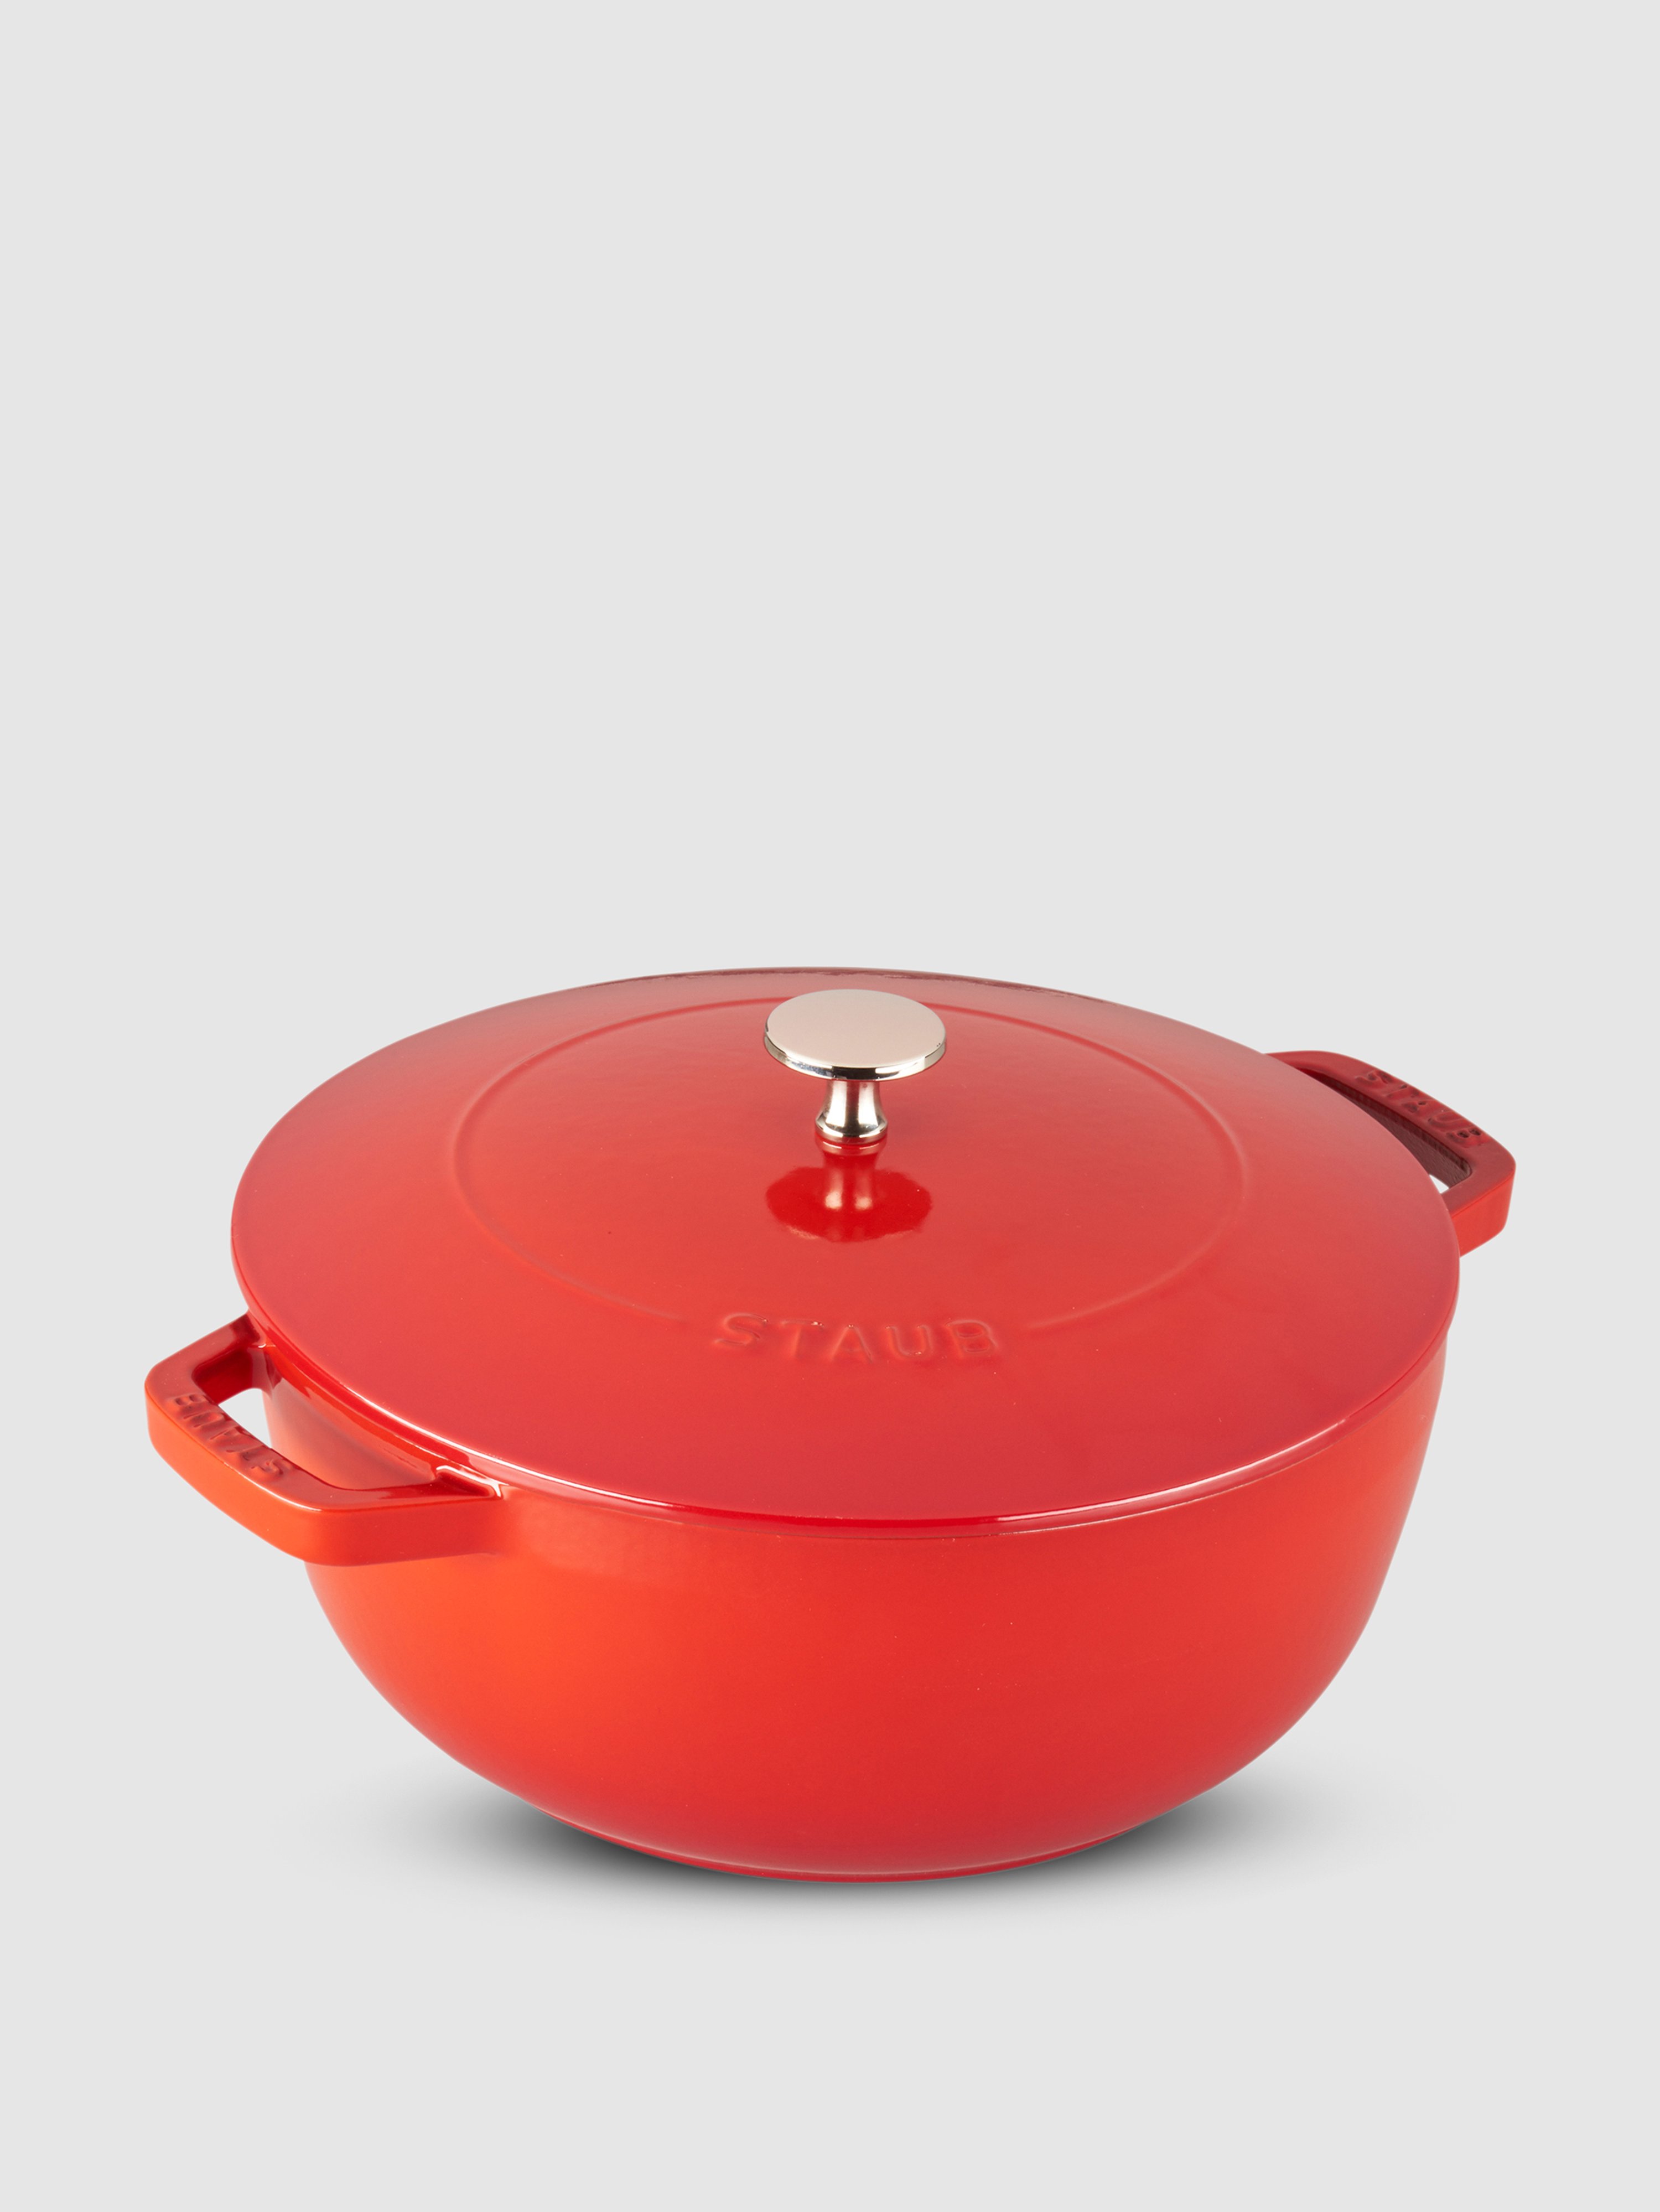 Staub 3.75-qt Essential French Oven